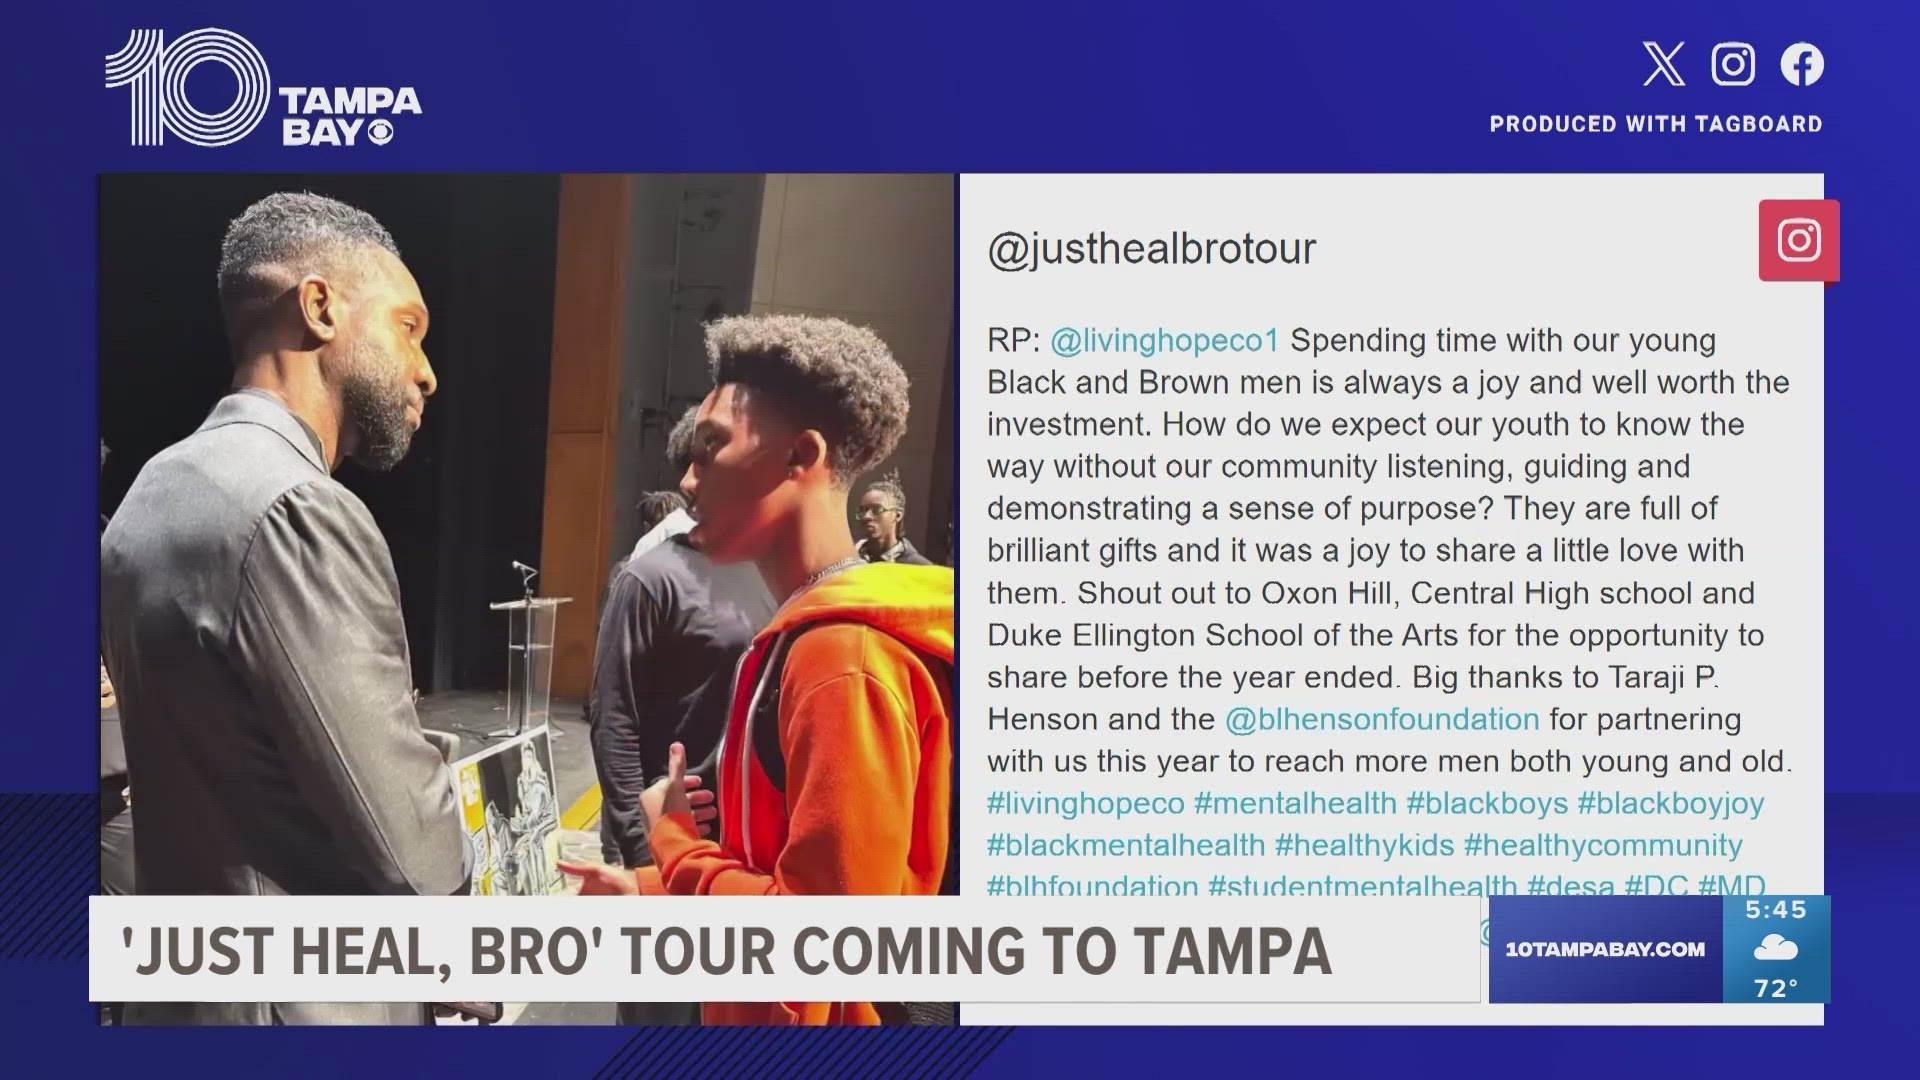 Just Heal, Bro is stopping at USF Tampa on Saturday, Feb. 17, and Foundation for a Healthy St. Petersburg on Sunday, Feb. 18. The event is free.